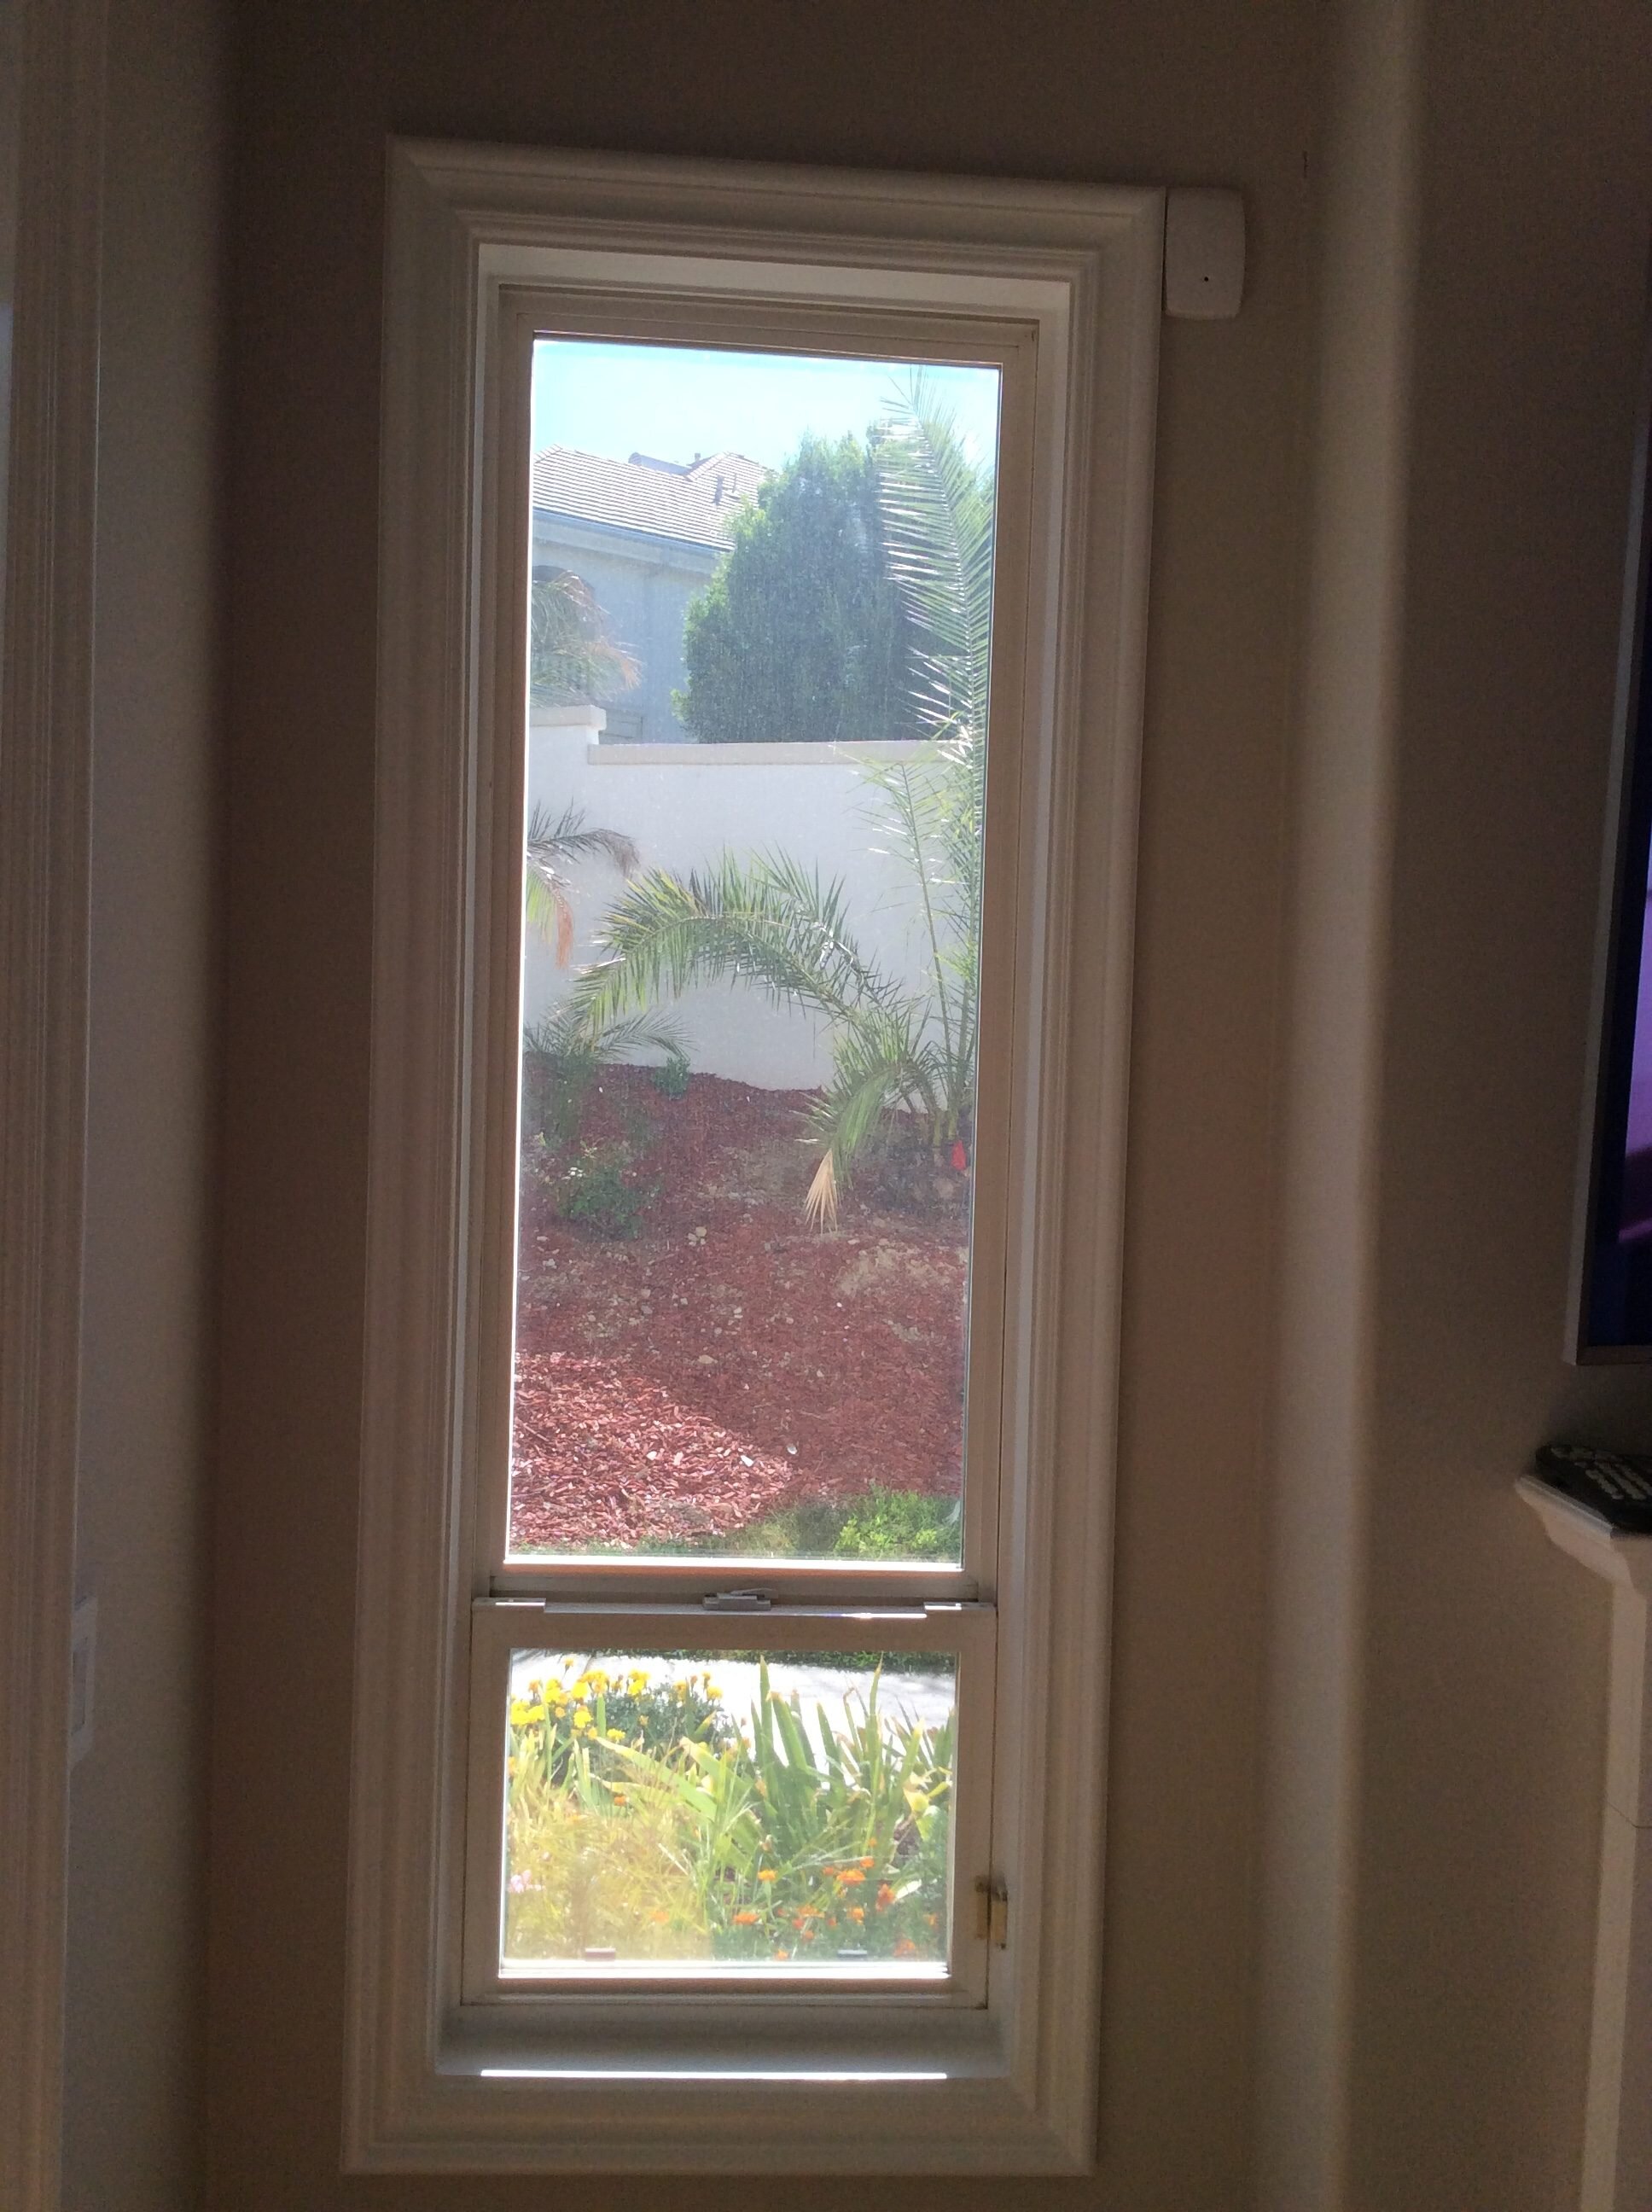 Block Heat and Add Privacy with Home Window Tint in Santa Monica, CA 90405